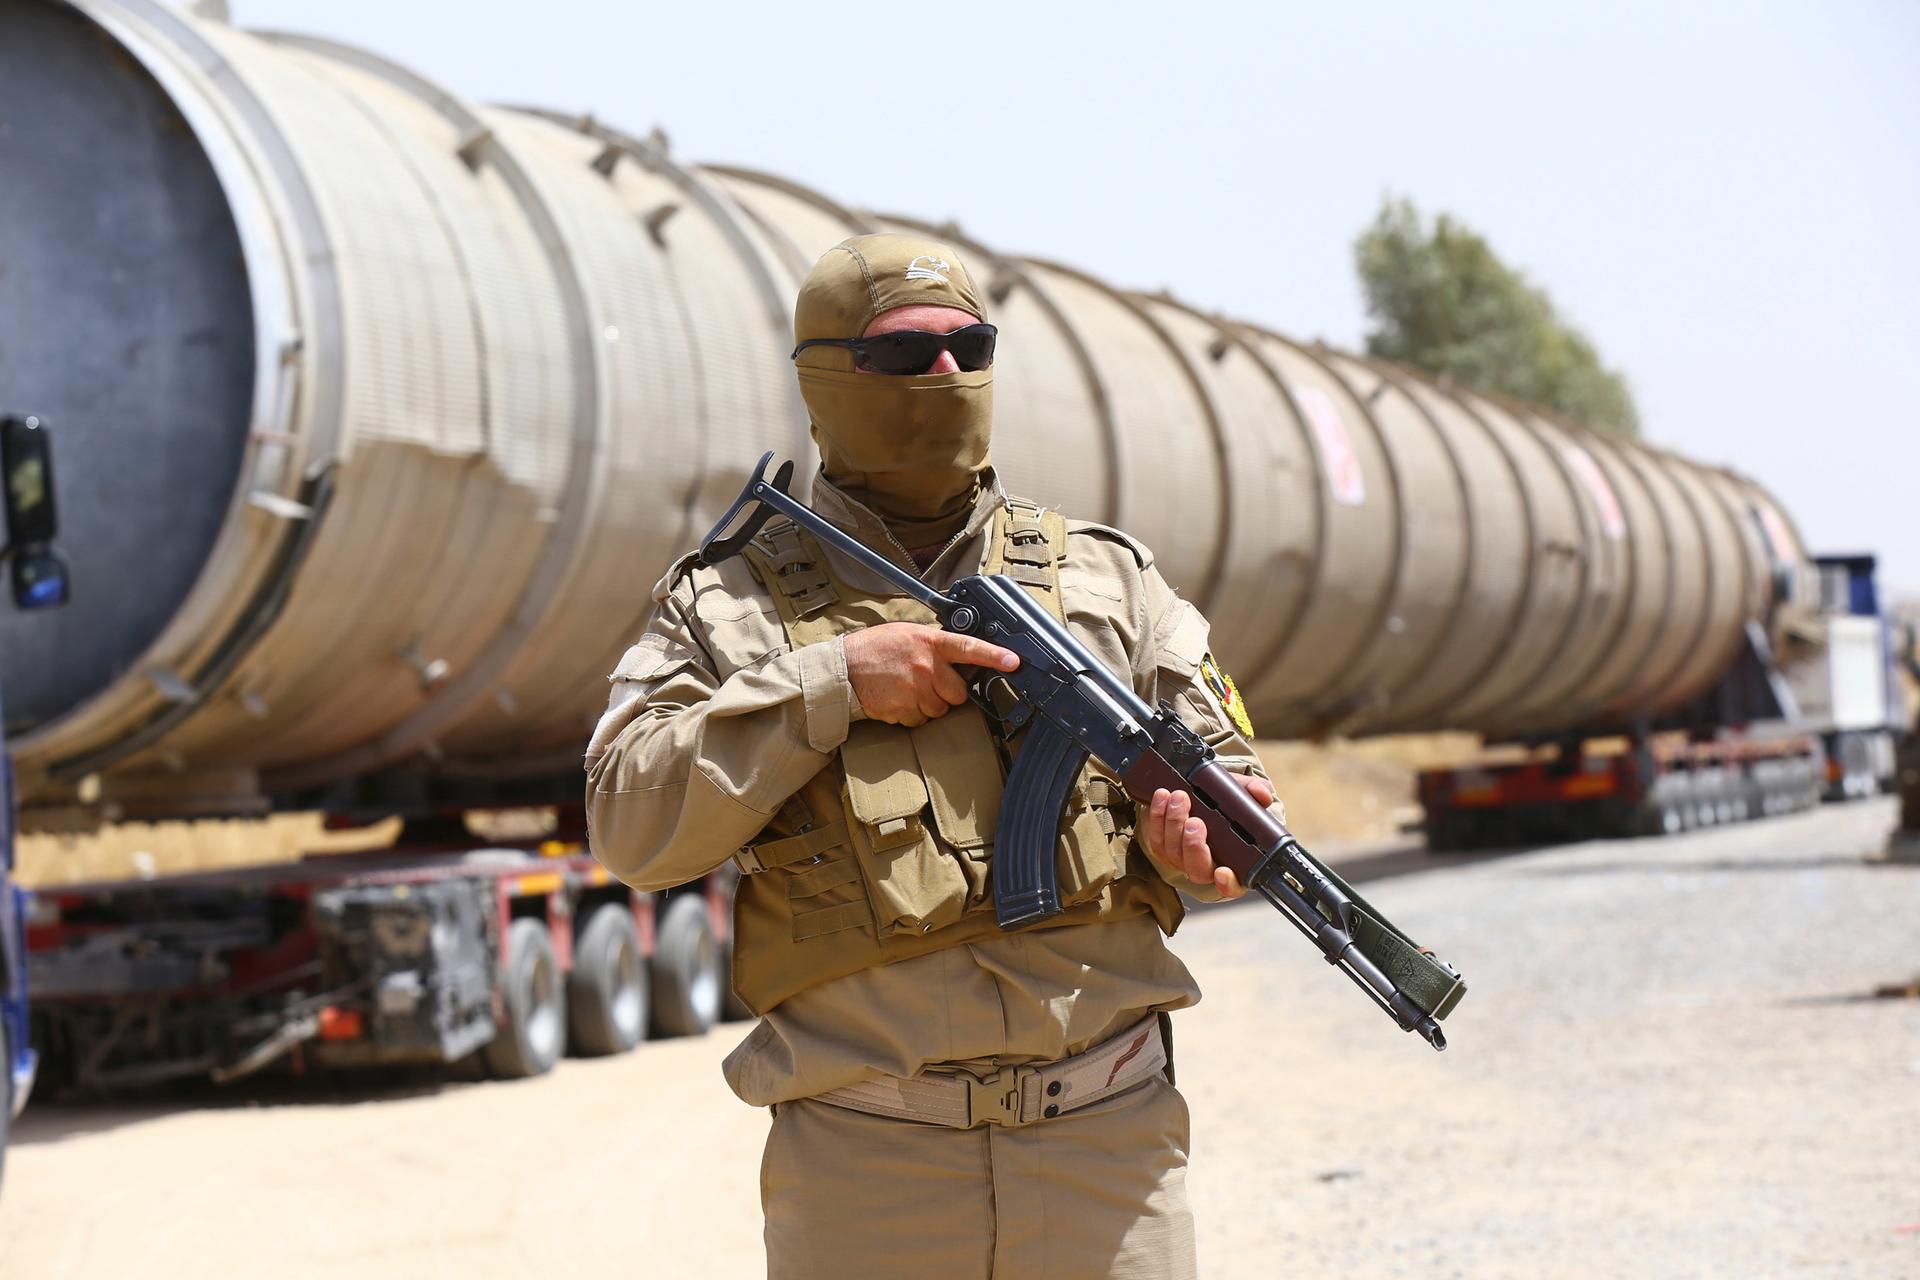 A member of the Kurdish security forces takes up position with his weapon as he guards a section of an oil refinery.